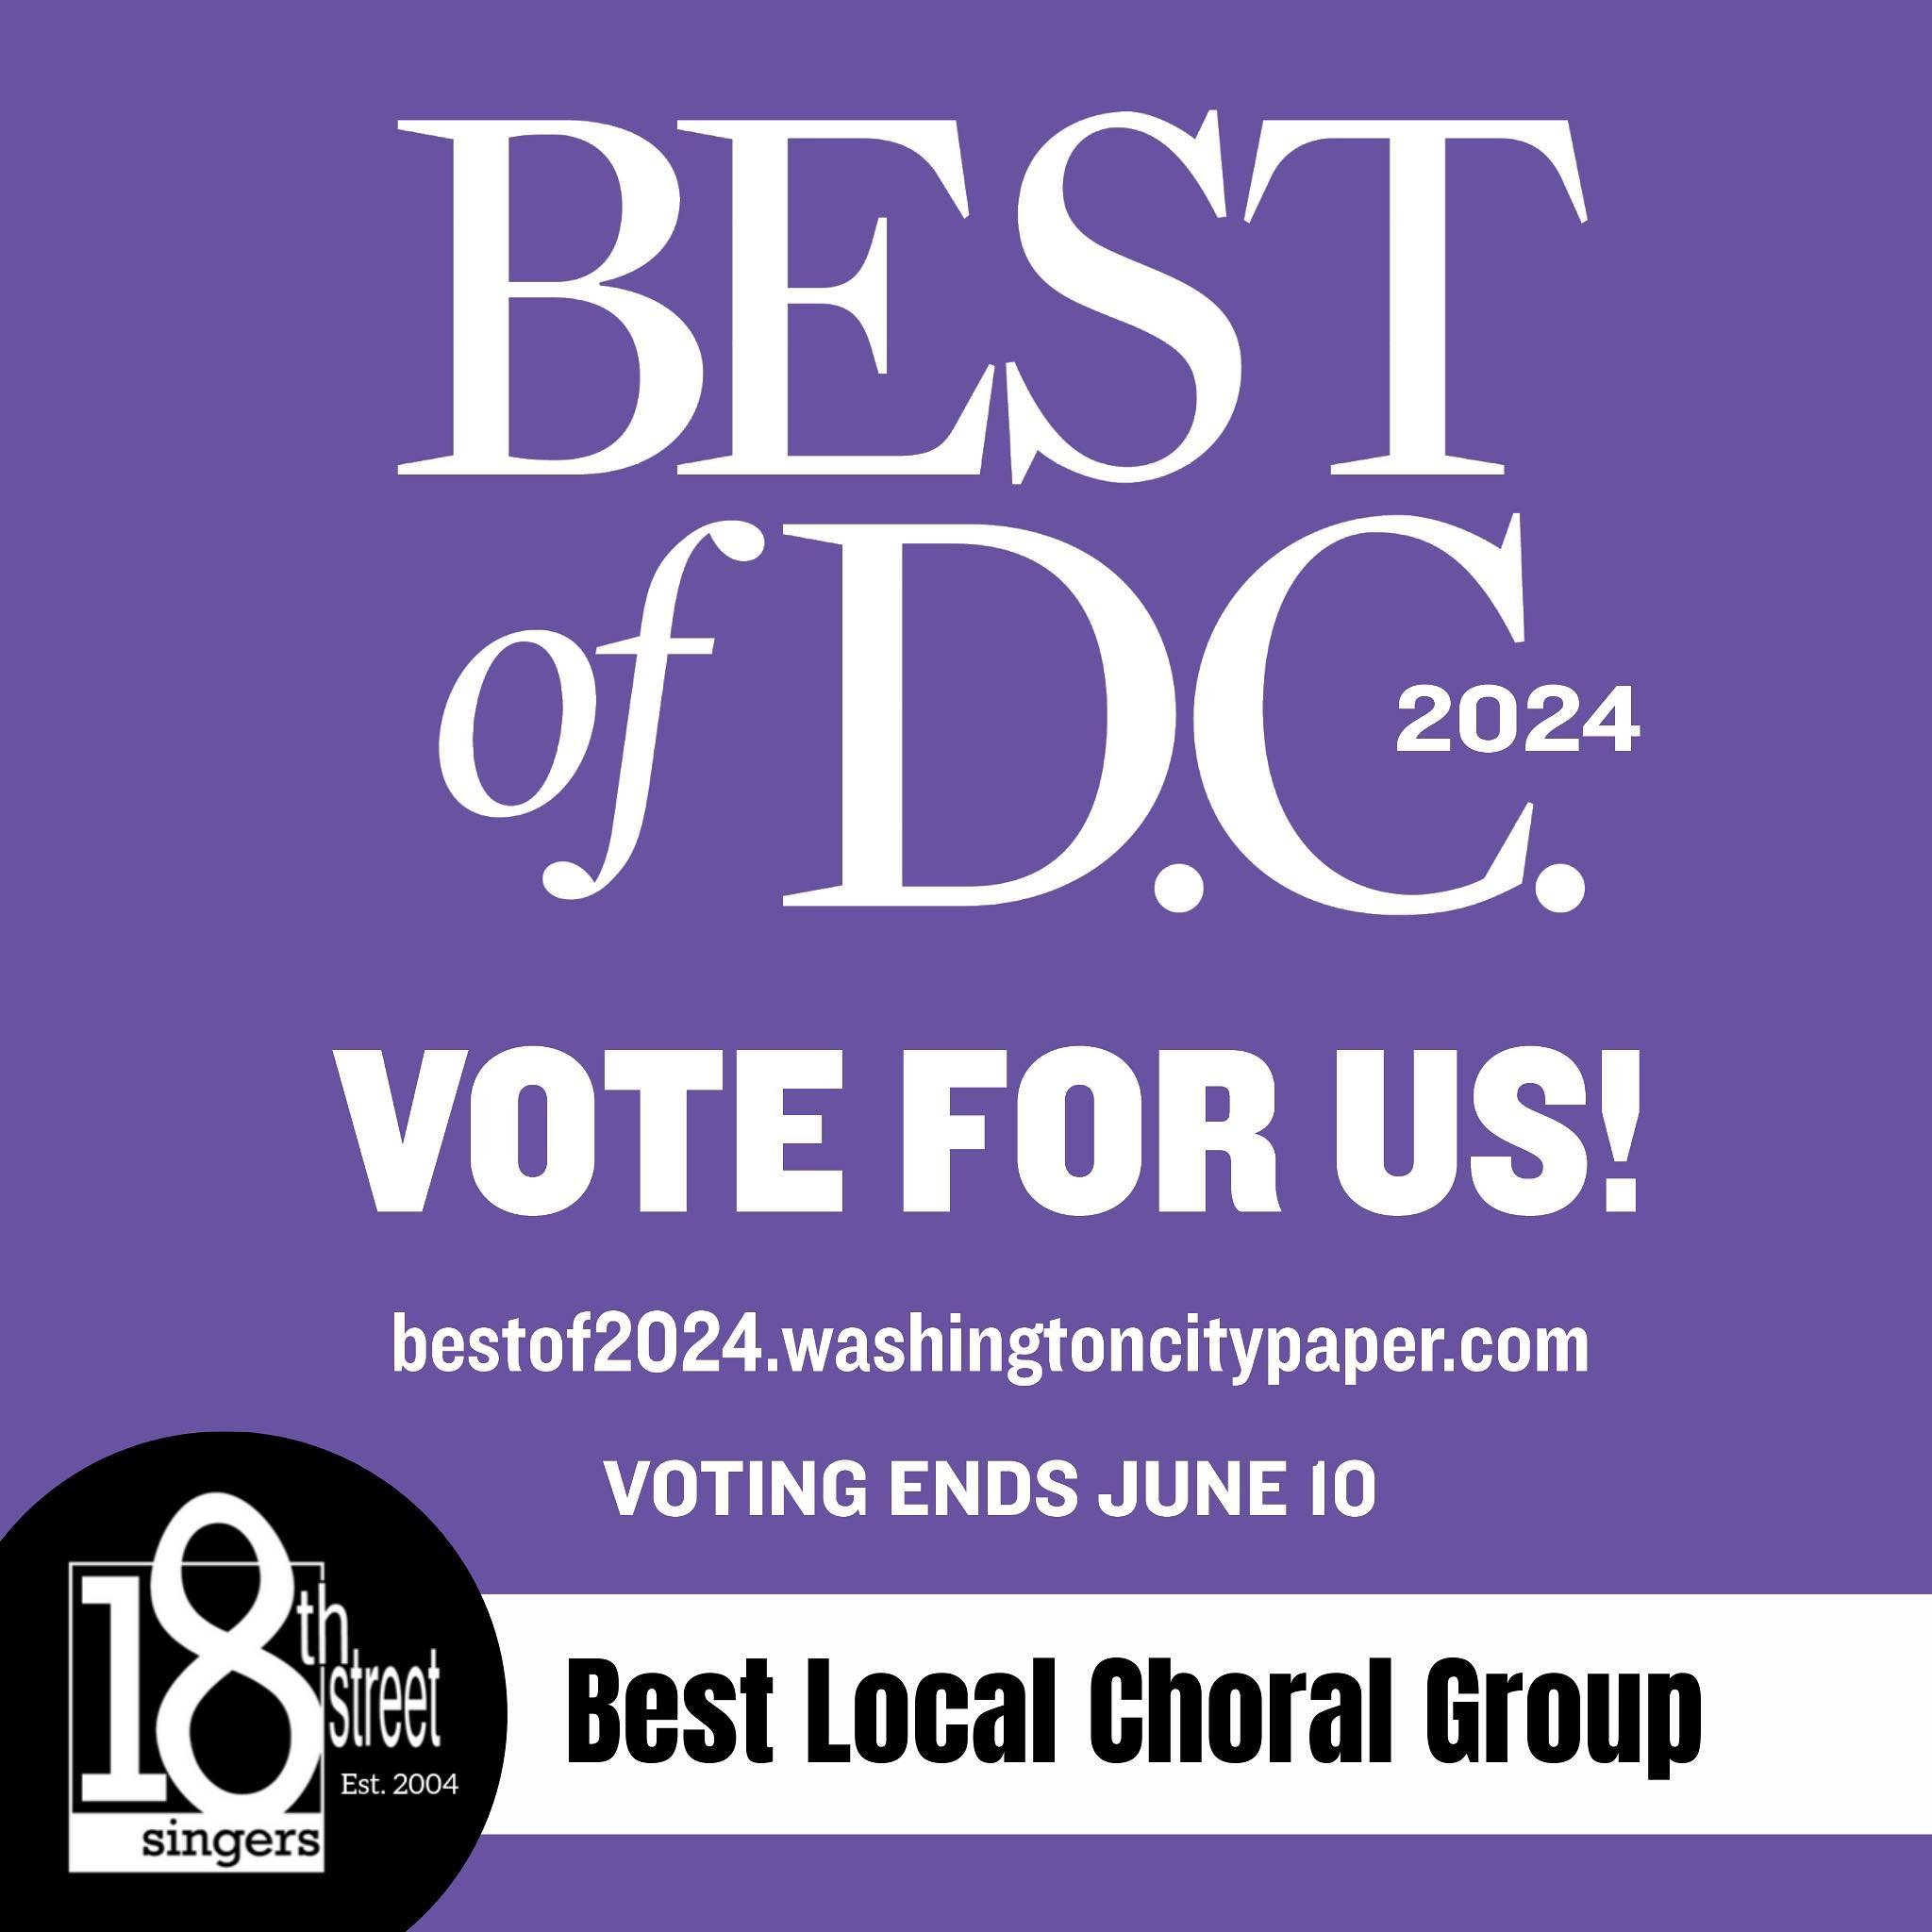 Spring has sprung in DC, and we know what that means: Best of DC 2024 voting! Take 3 mins right now to submit your vote for us as Best Local Choral Group again this year! 

Thank you to everyone for voting between now and June 10th at 5pm! Link in ou